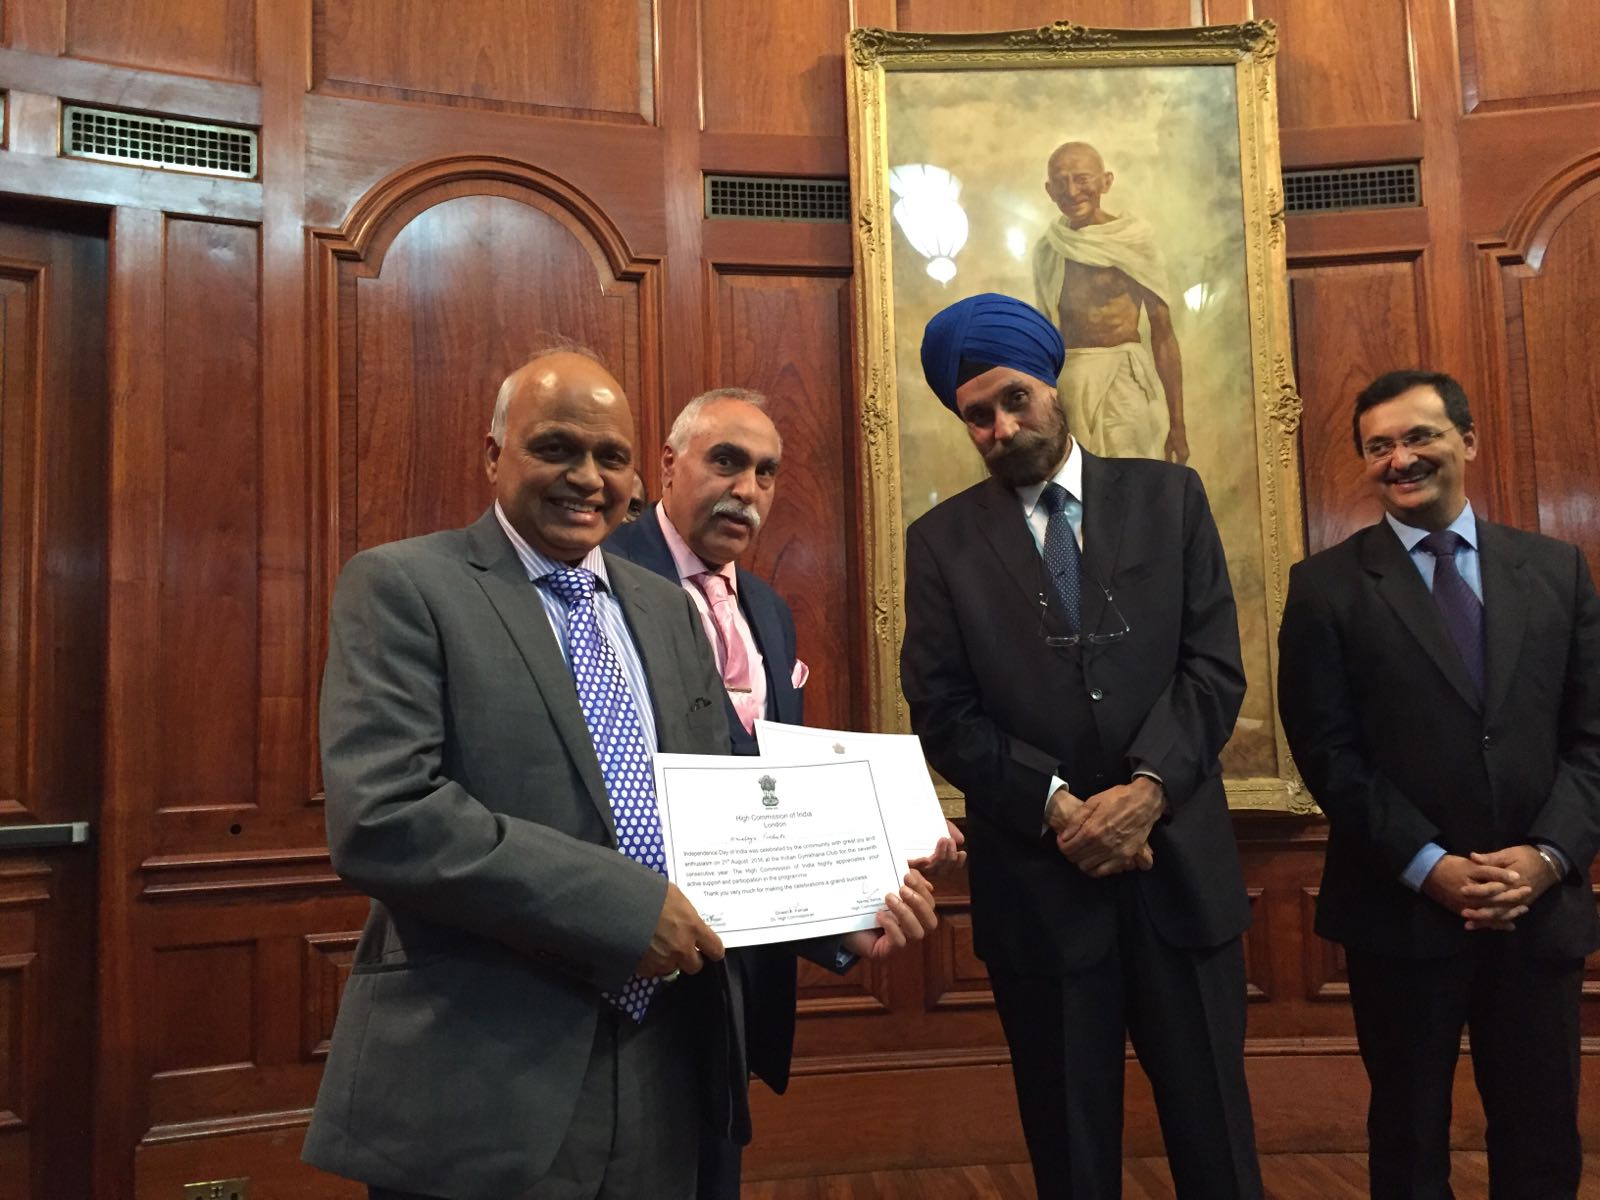 Hindu Council UK receives appreciation certificate from the High Commissioner of India in London